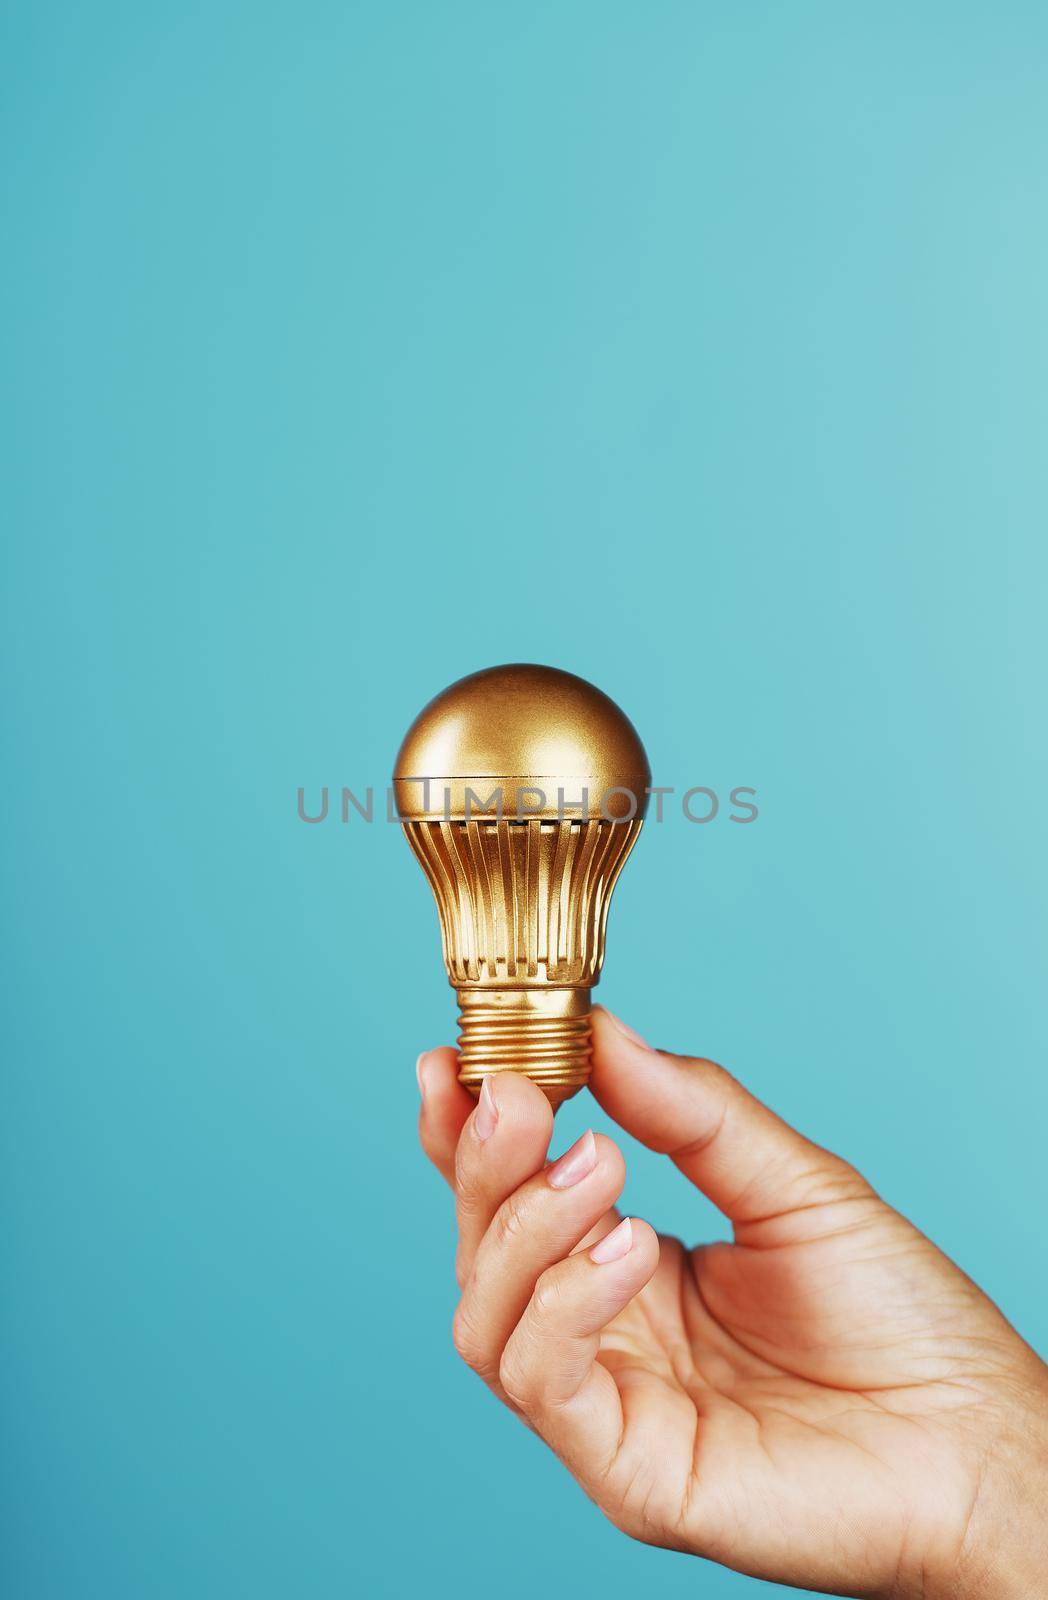 Gold light bulb in hand on a blue background, as a concept of ideas and assistance. Isolate, minimalistic